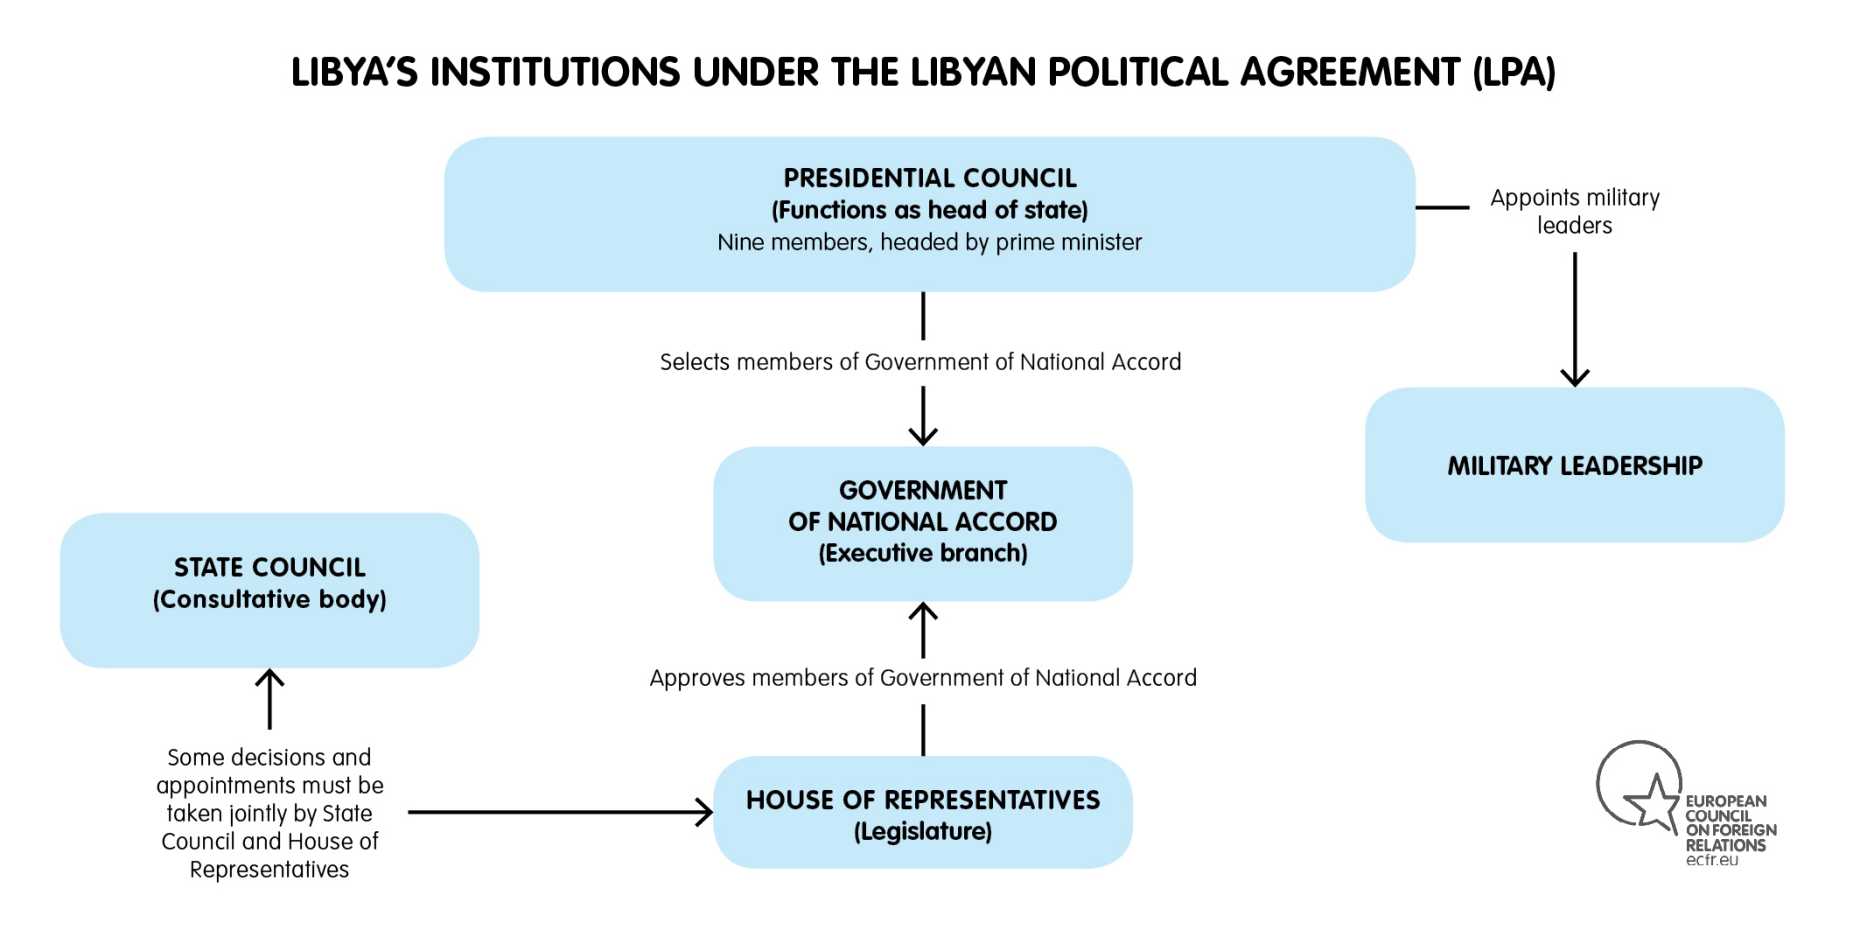 Libya’s Institutions under the Libyan Political Agreement (LPA)